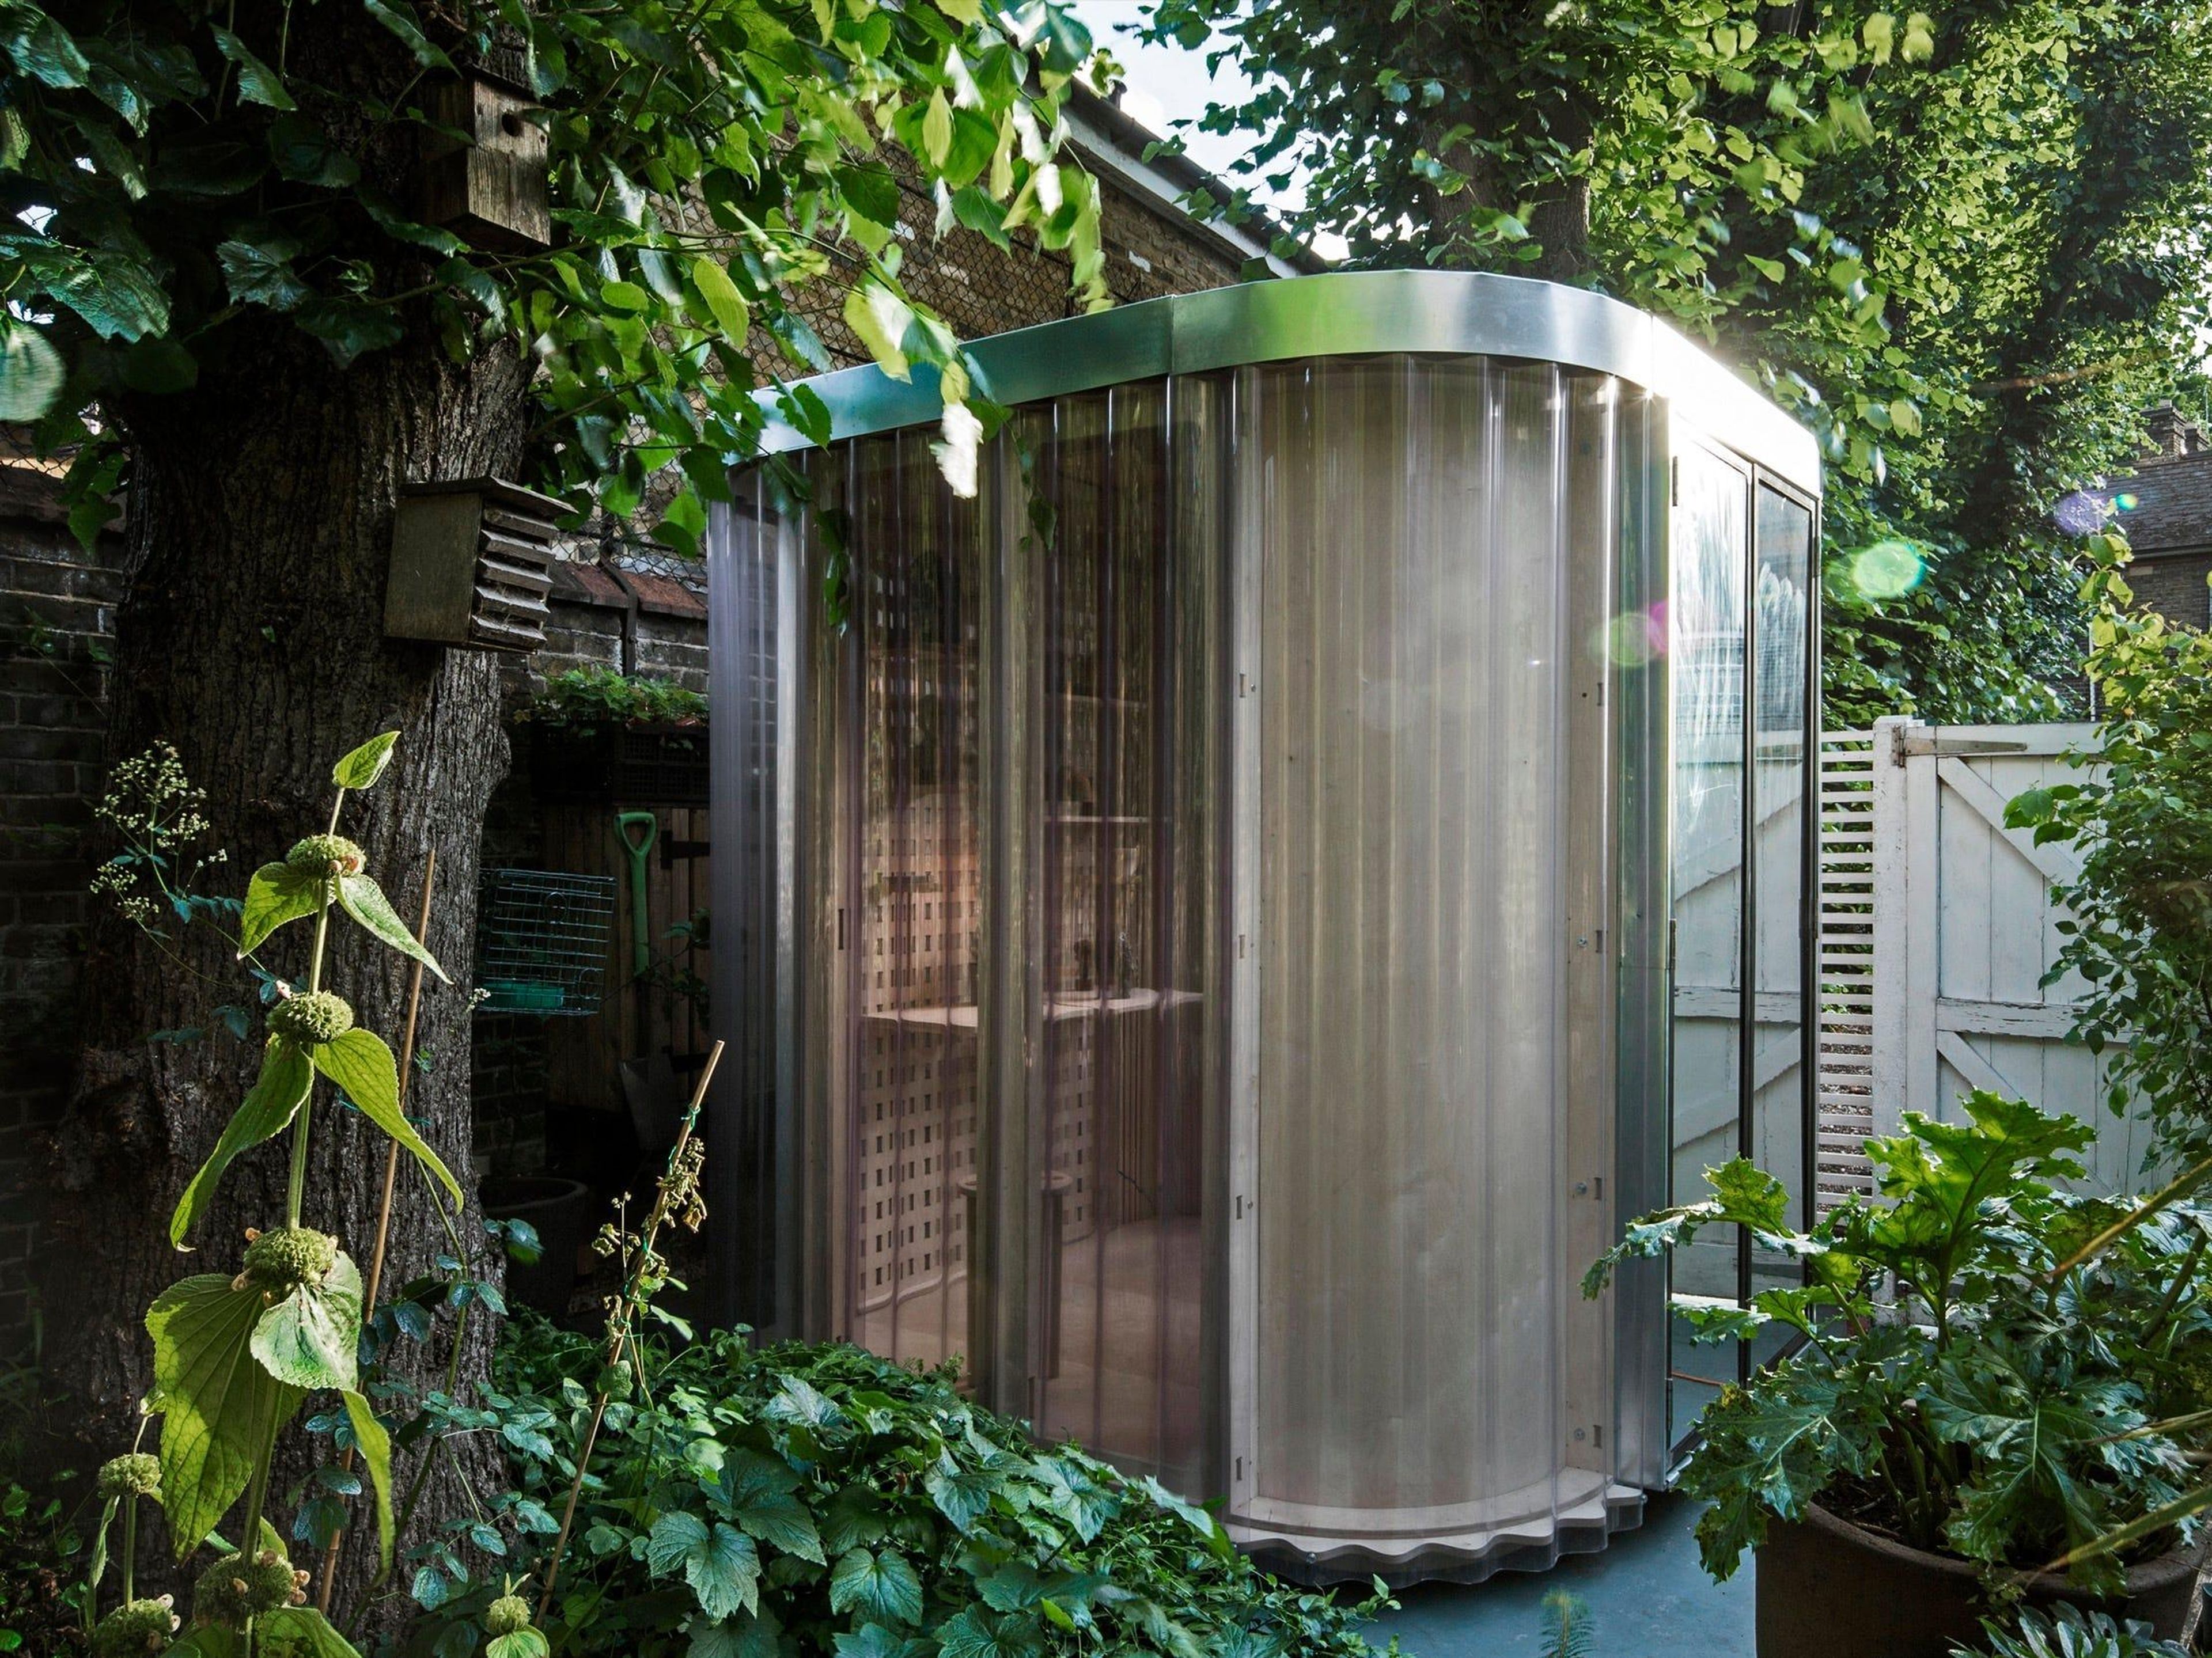 This $6,300 backyard tiny office made out of plywood and polycarbonate offers just 40 square feet to work from home in — see inside